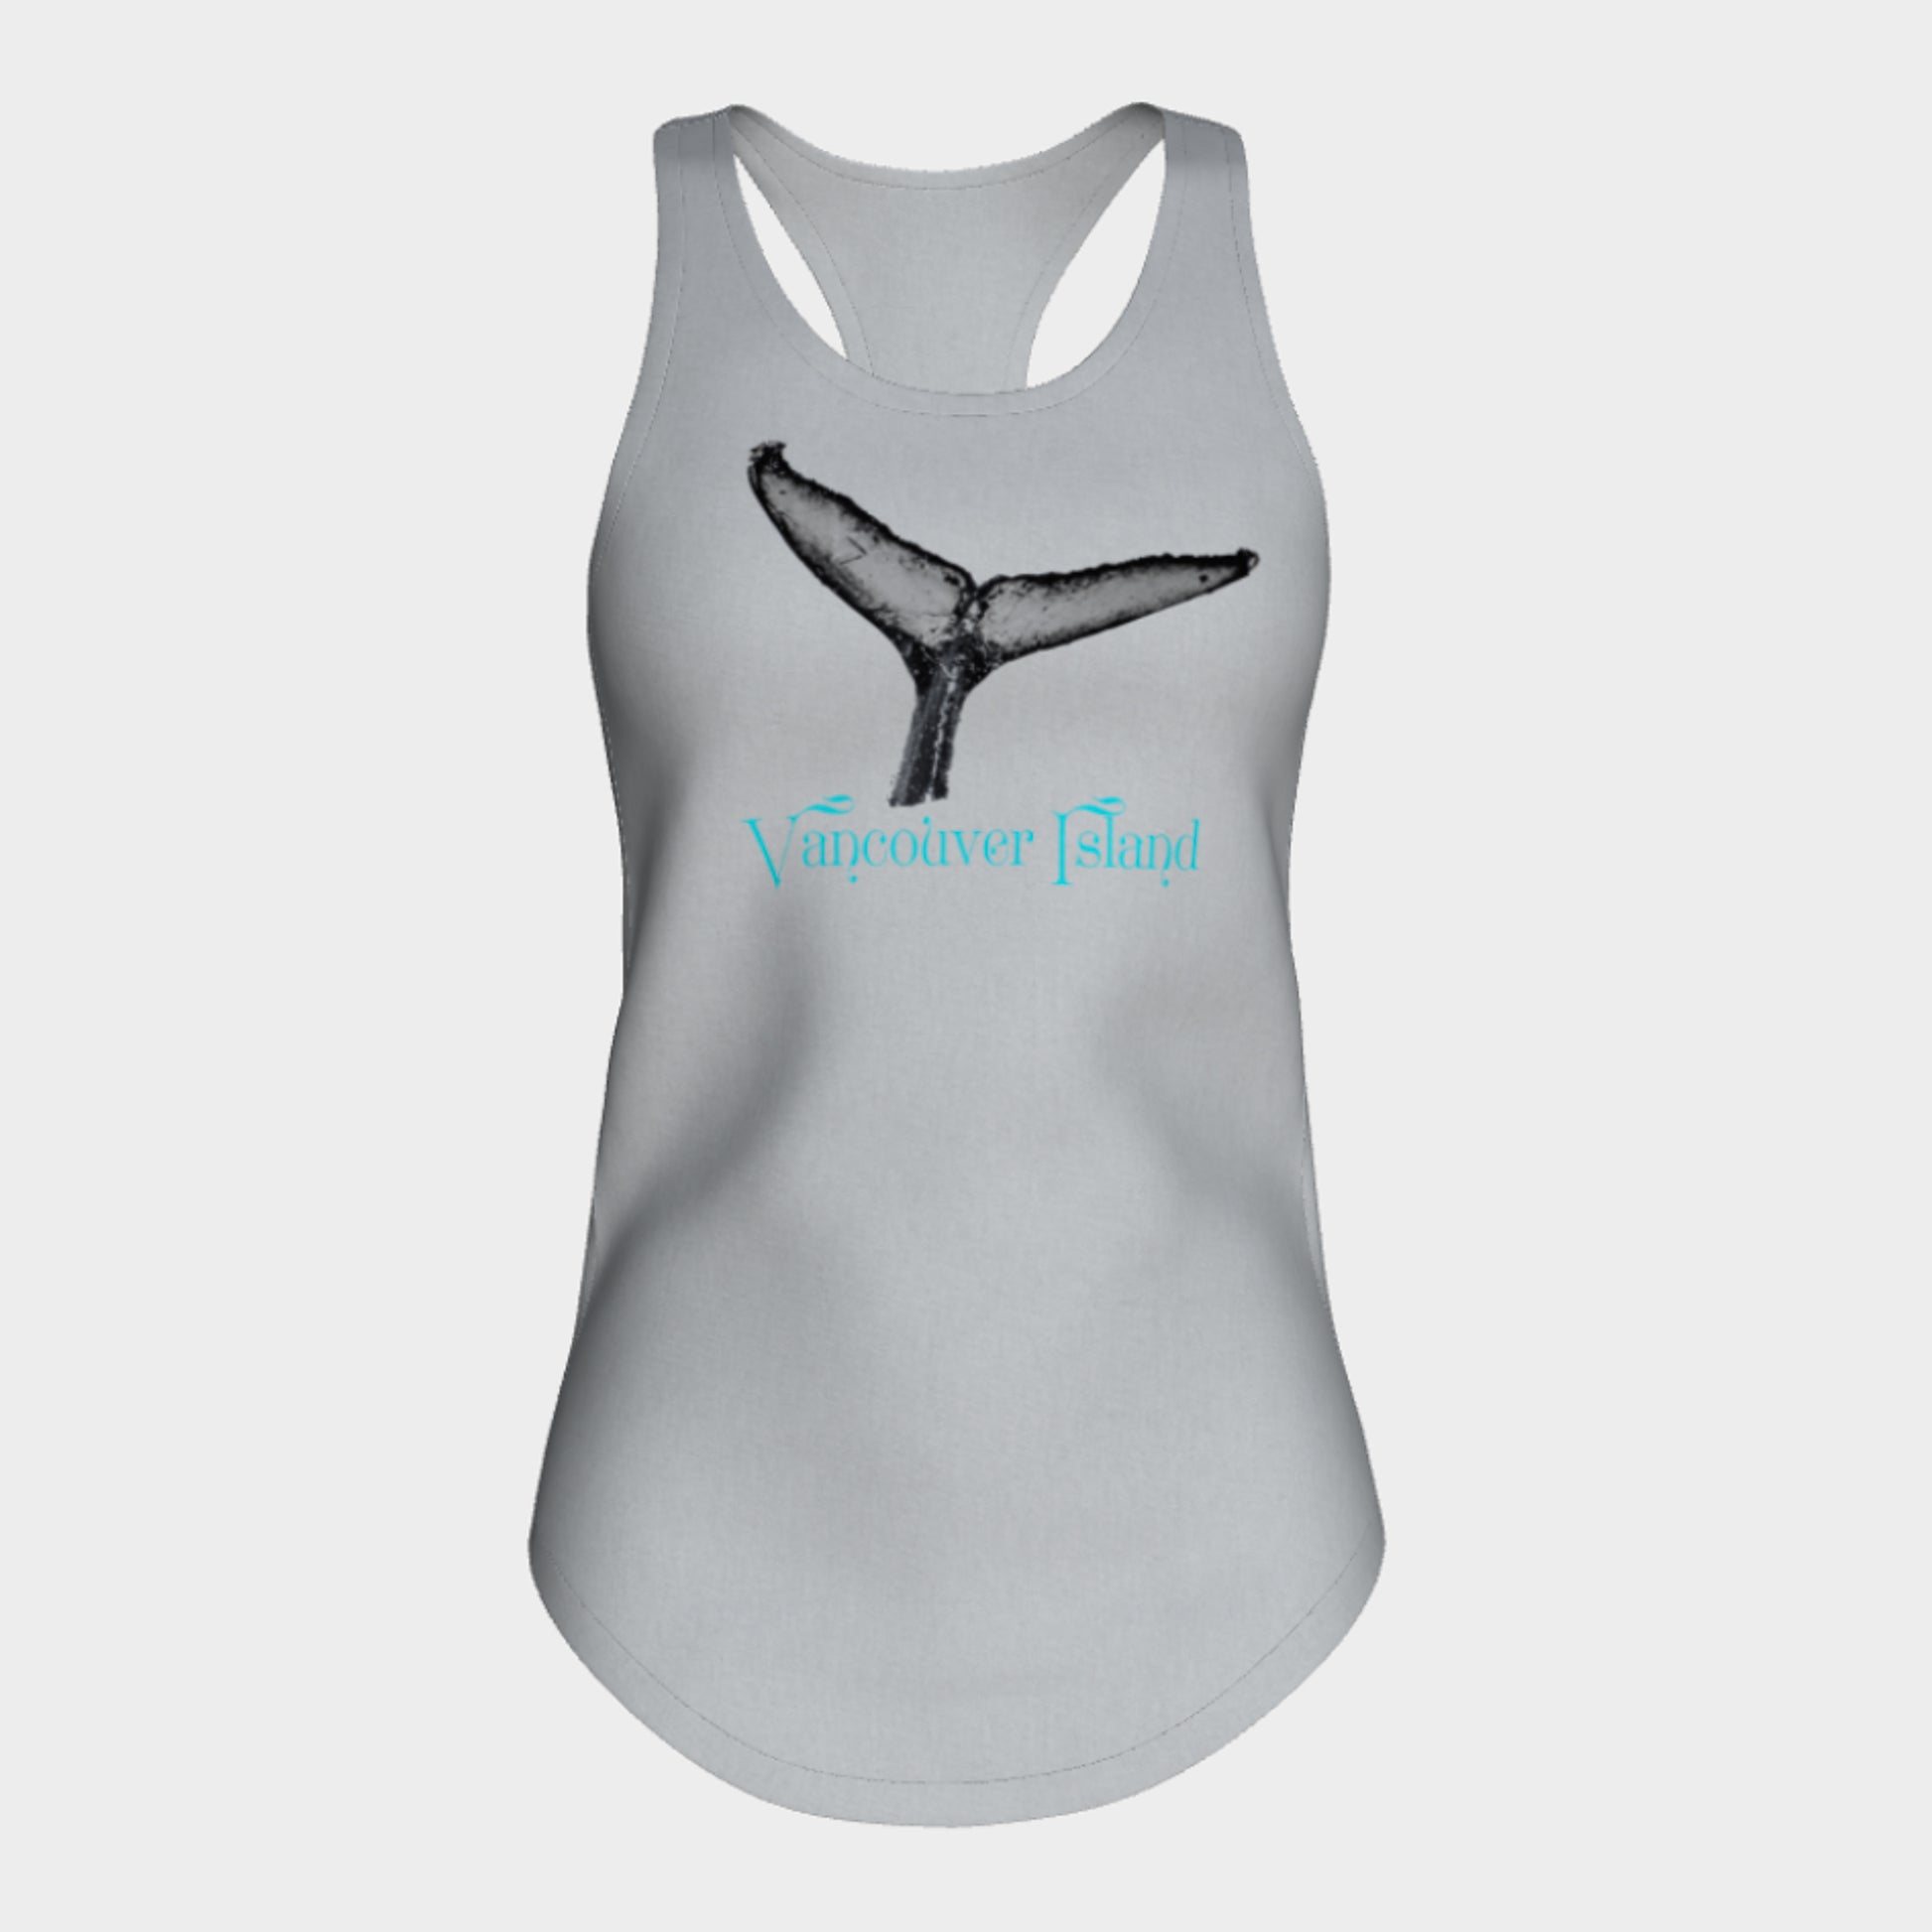 Made from 60% spun cotton and 40% poly for a mix of comfort and performance, you get it all (including my photography and digital art) with this custom printed racerback tank top.   Van Isle Goddess Next Level racerback tank top will quickly become you go-to tank top because of the super comfy fit!